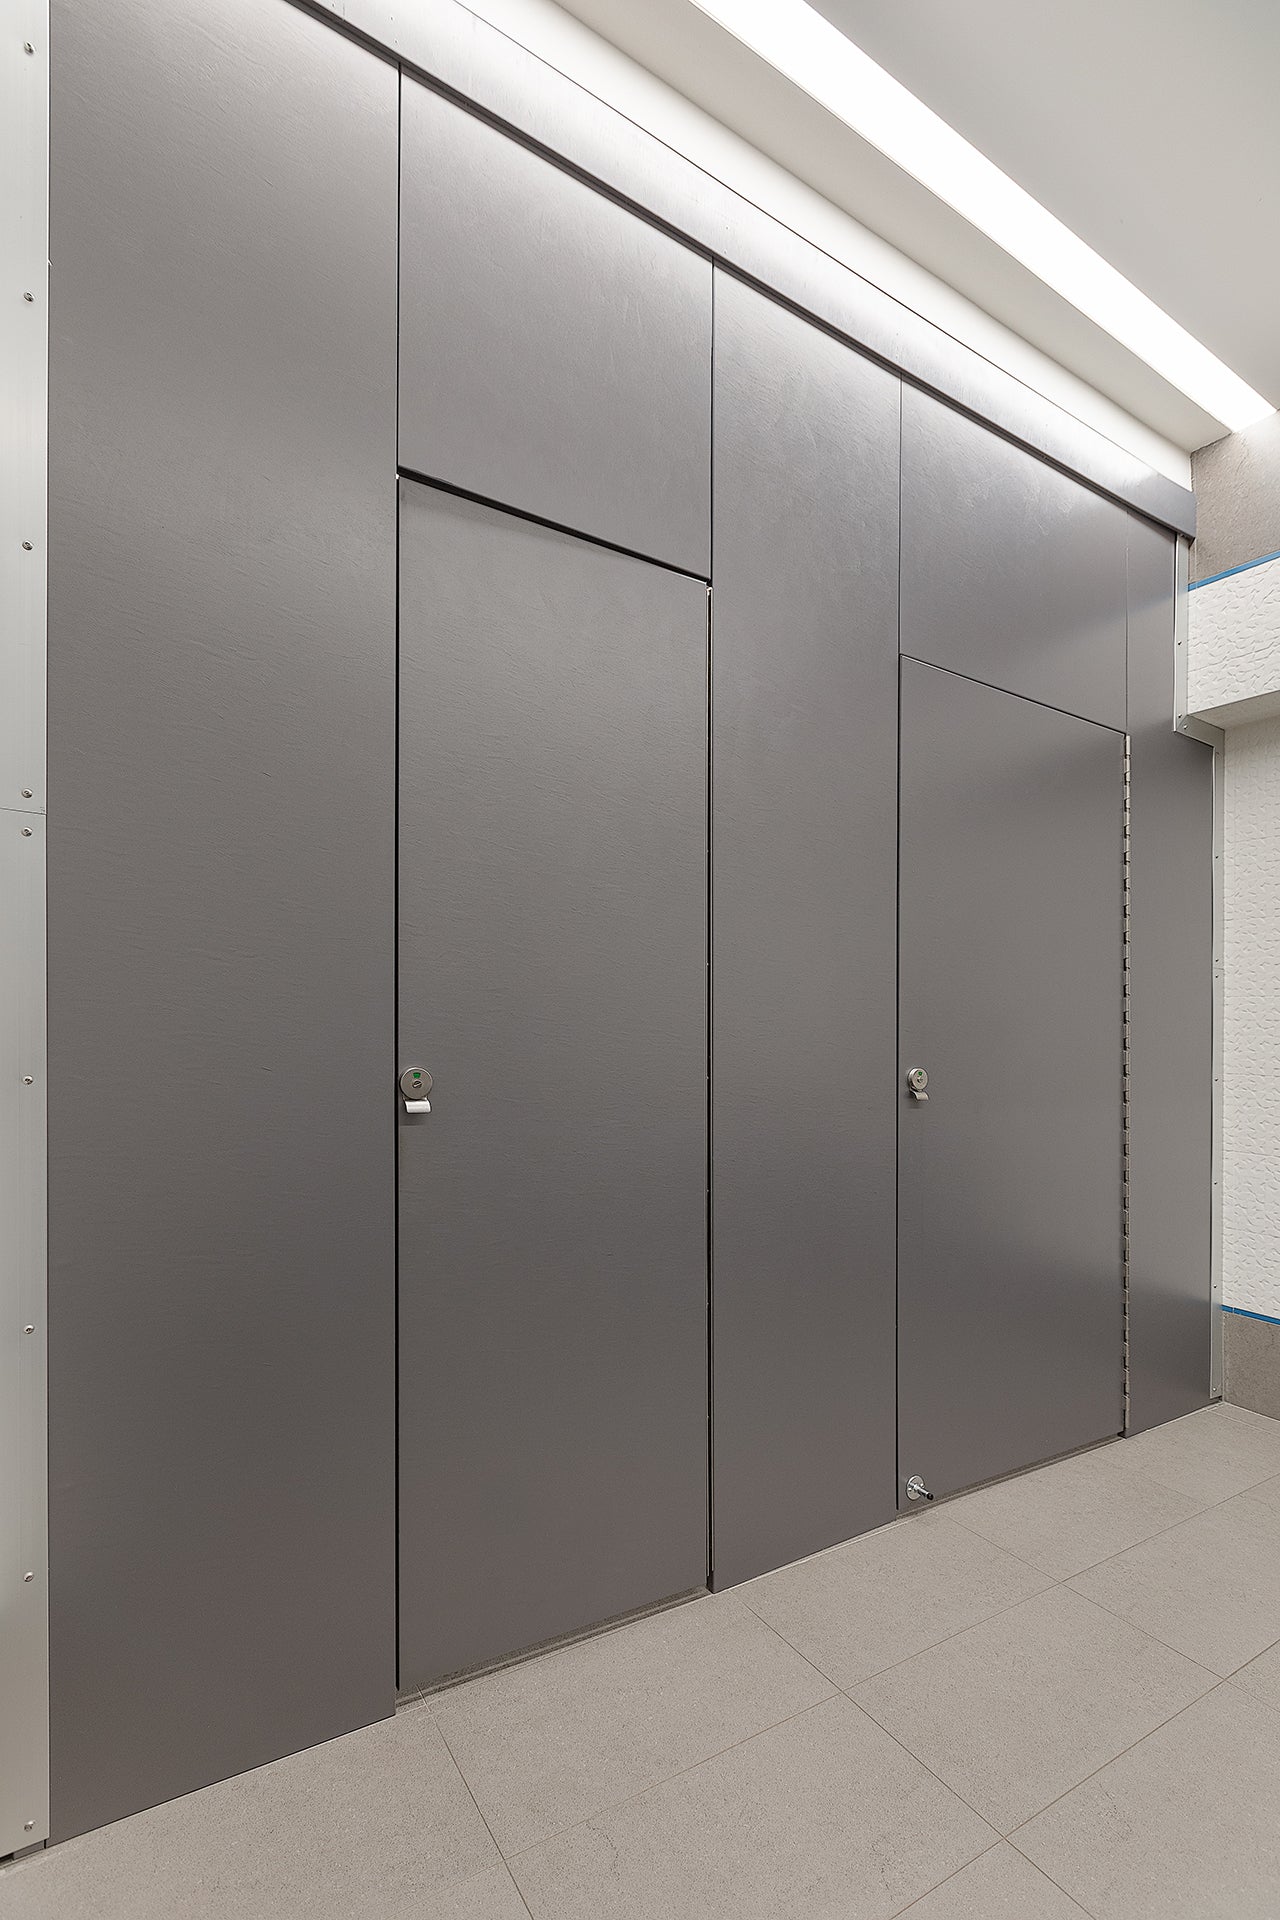 Aria series HDPE full height partitions rotary brushed Berkowatts Electric